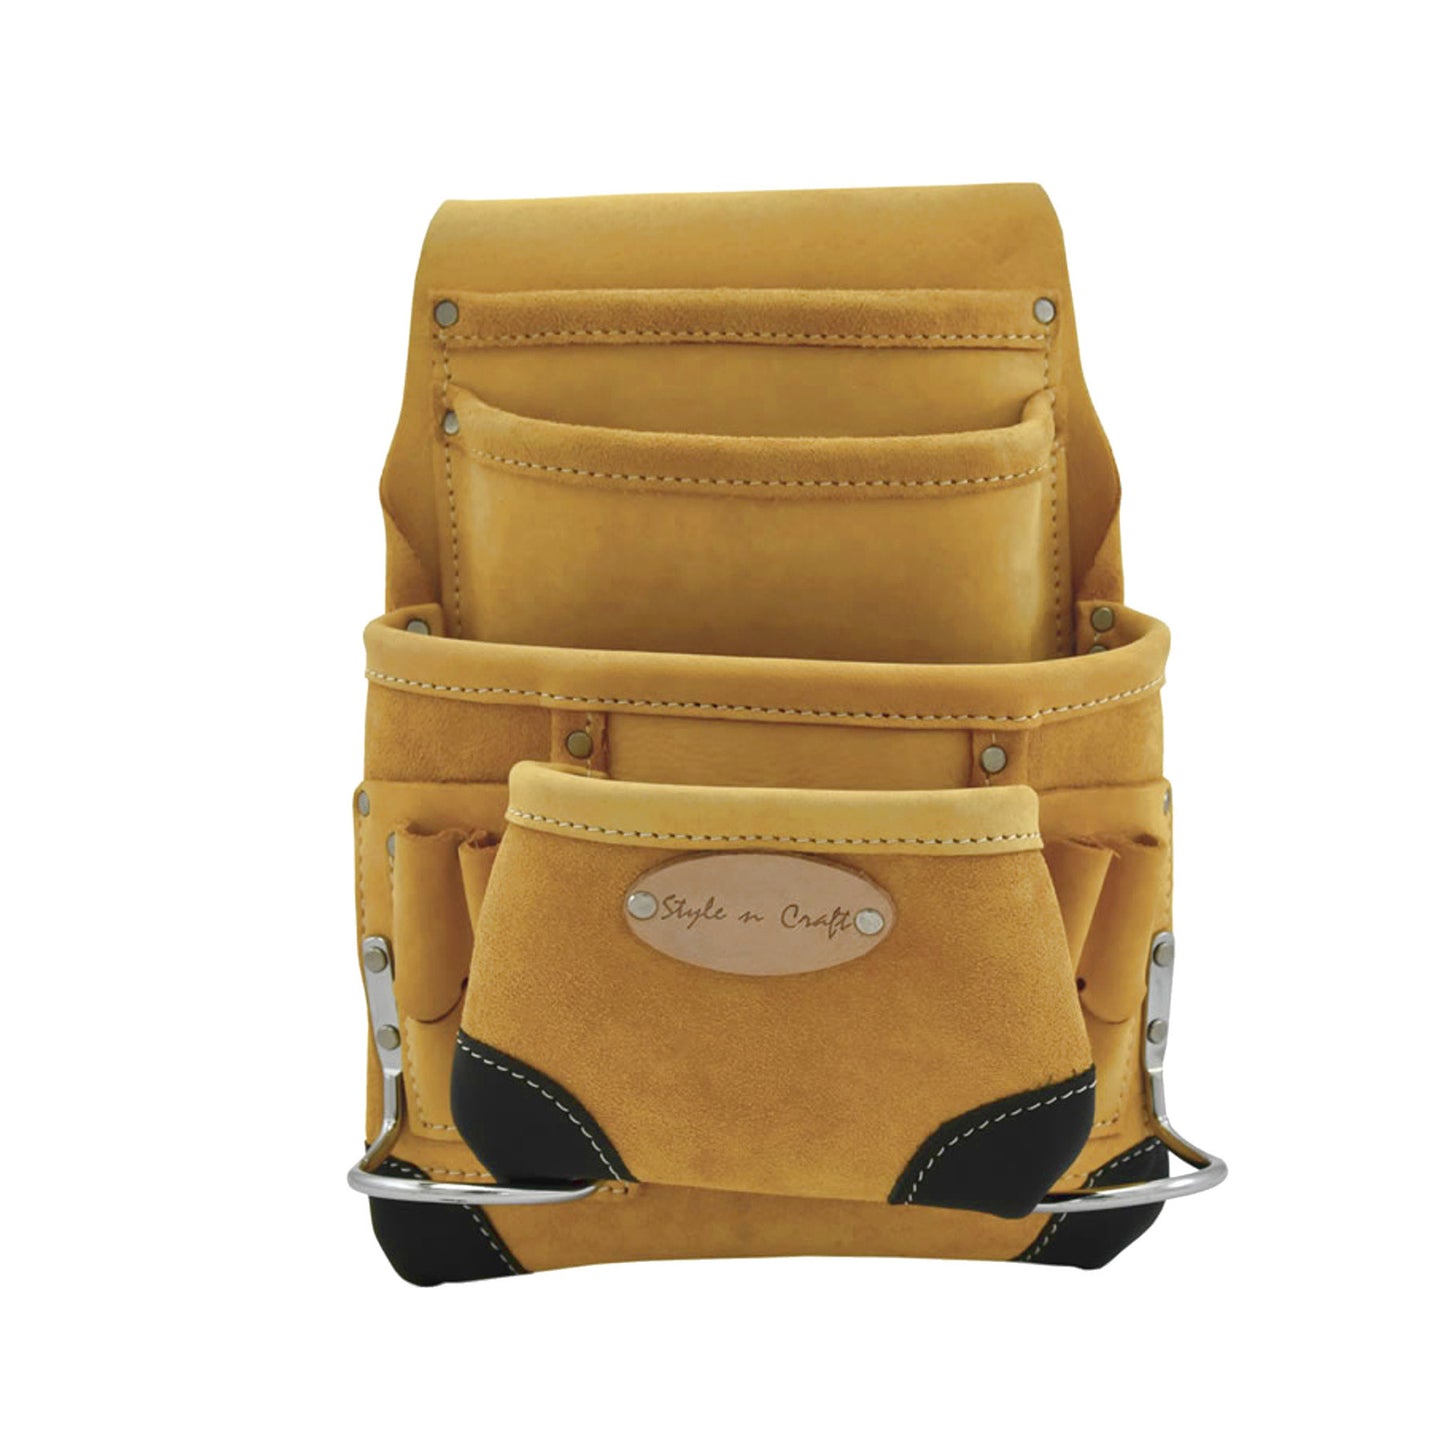 Style n Craft 93923 - 10 Pocket Carpenter's Nail & Tool Pouch in Yellow Top Grain Leather with Reinforced Corners in Black Top Grain Leather - Front View 2